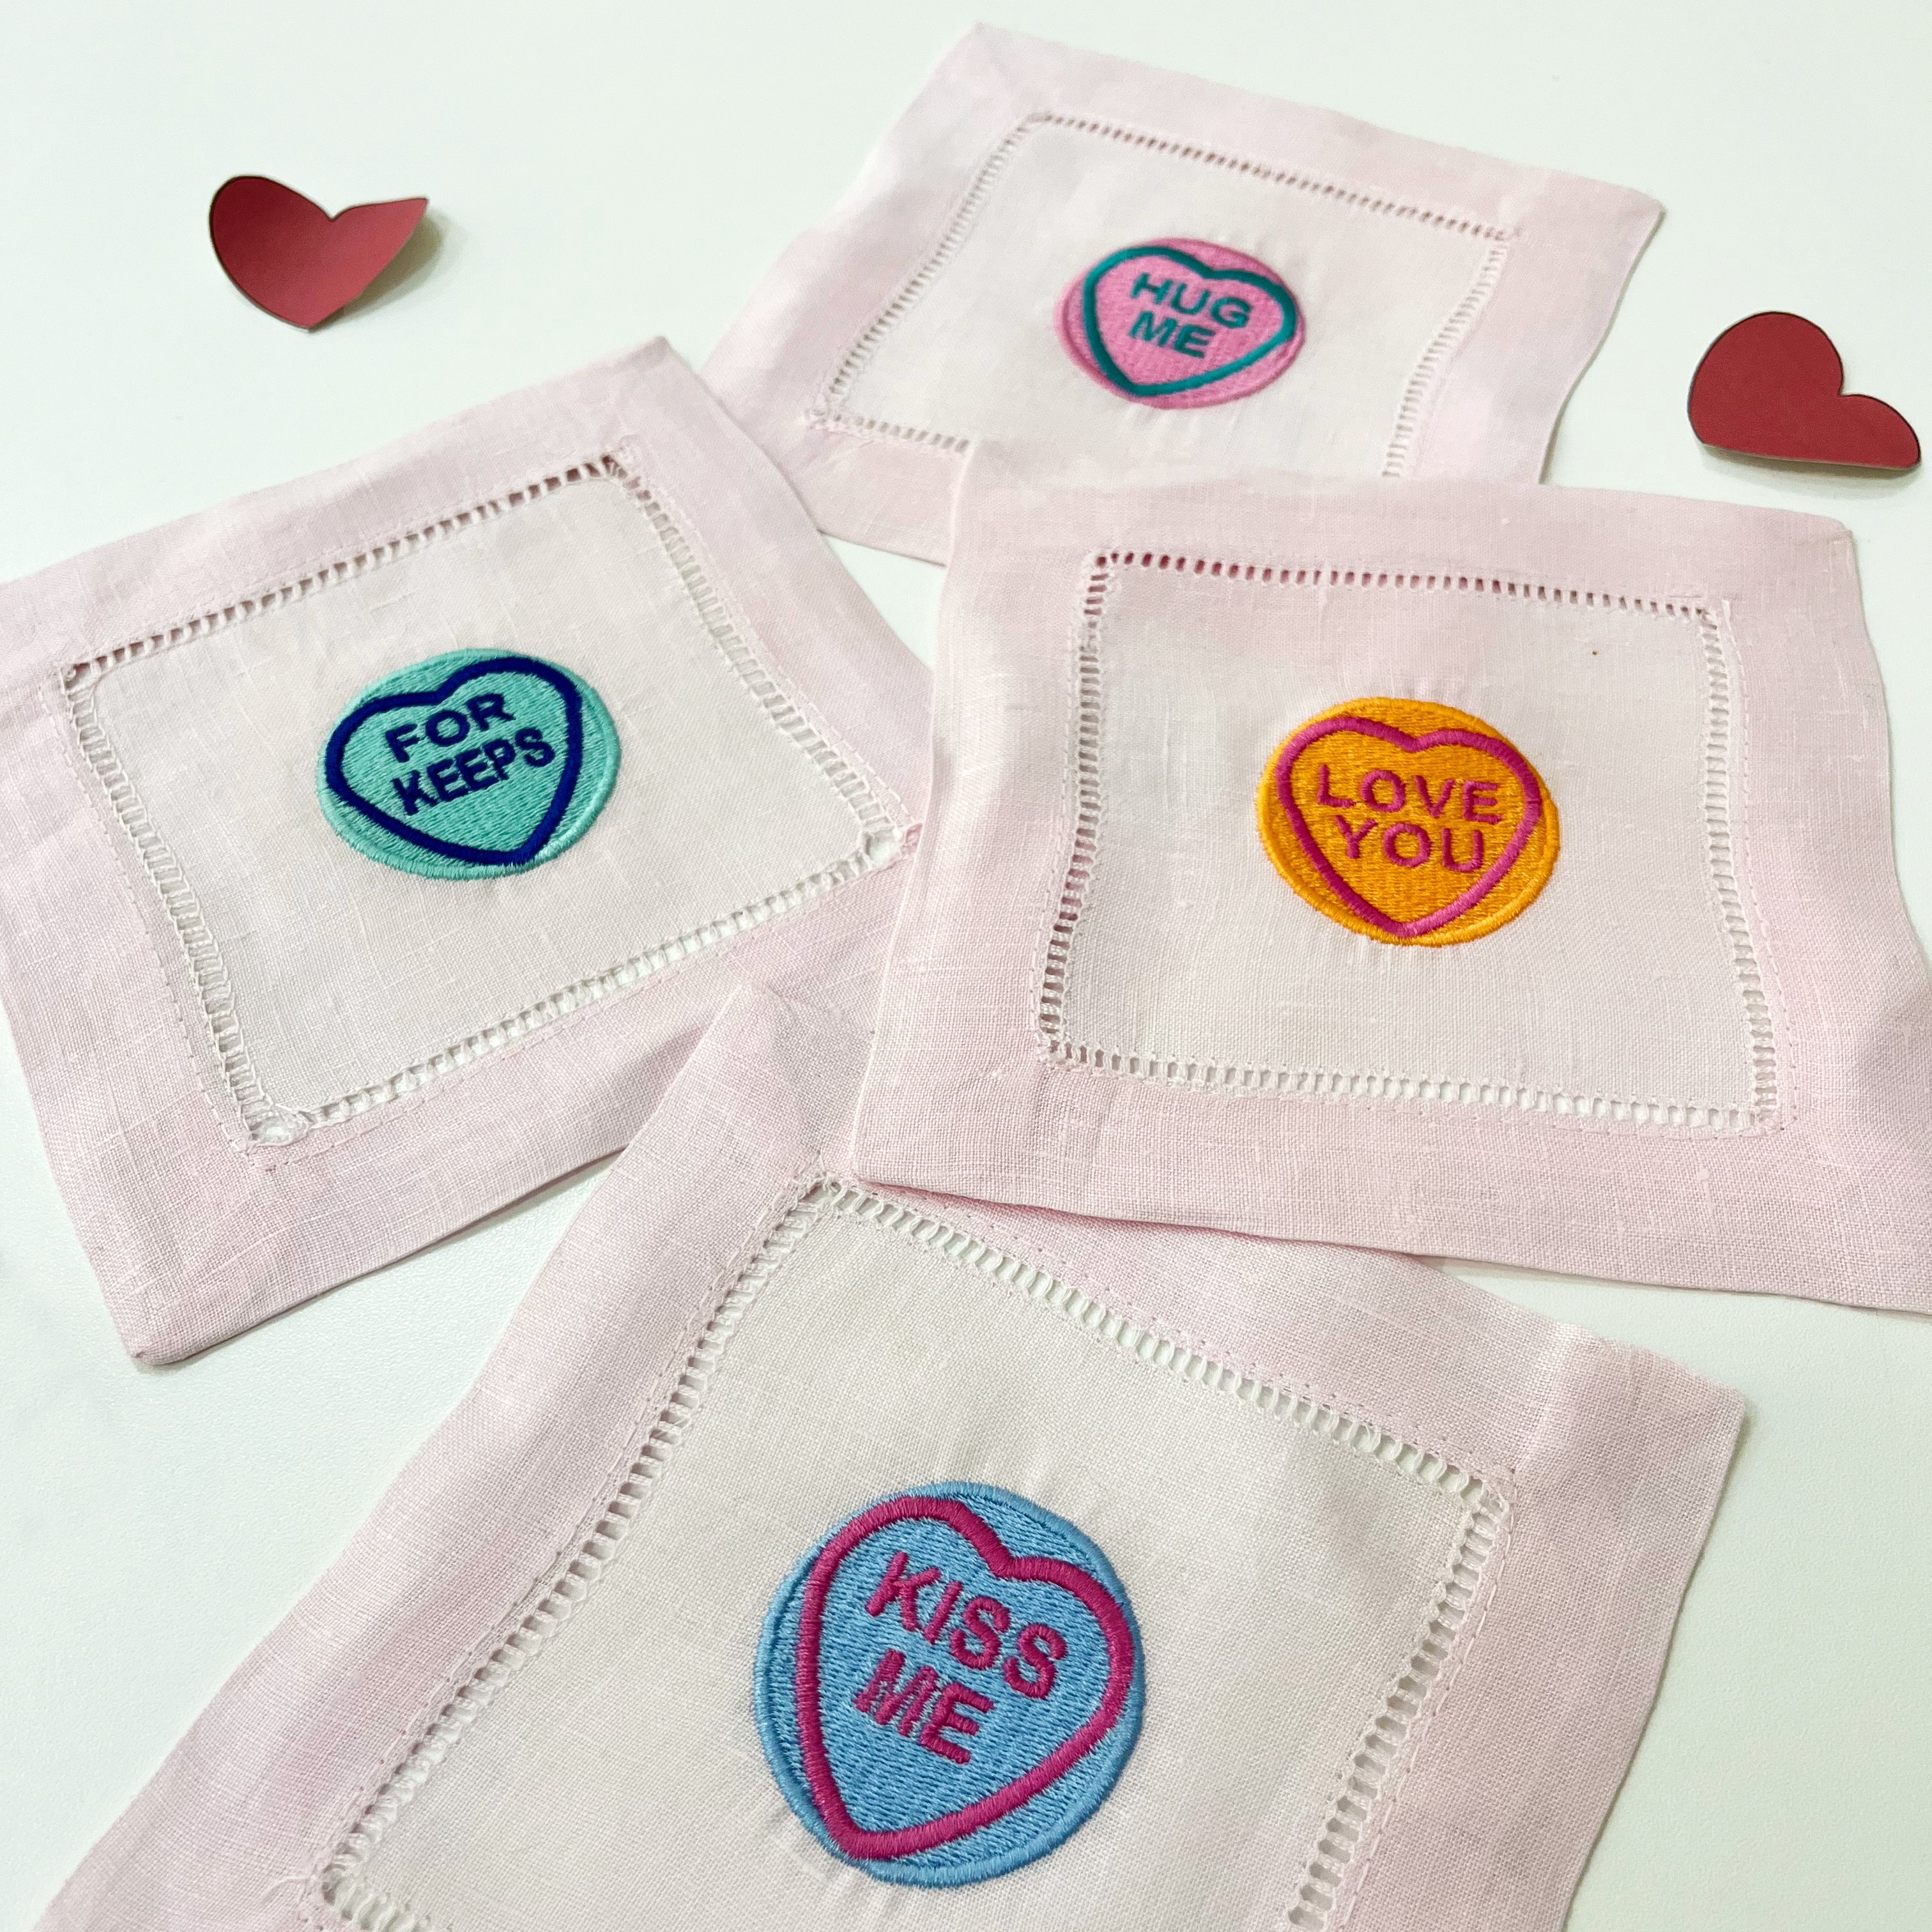 Love Heart embroidered coasters